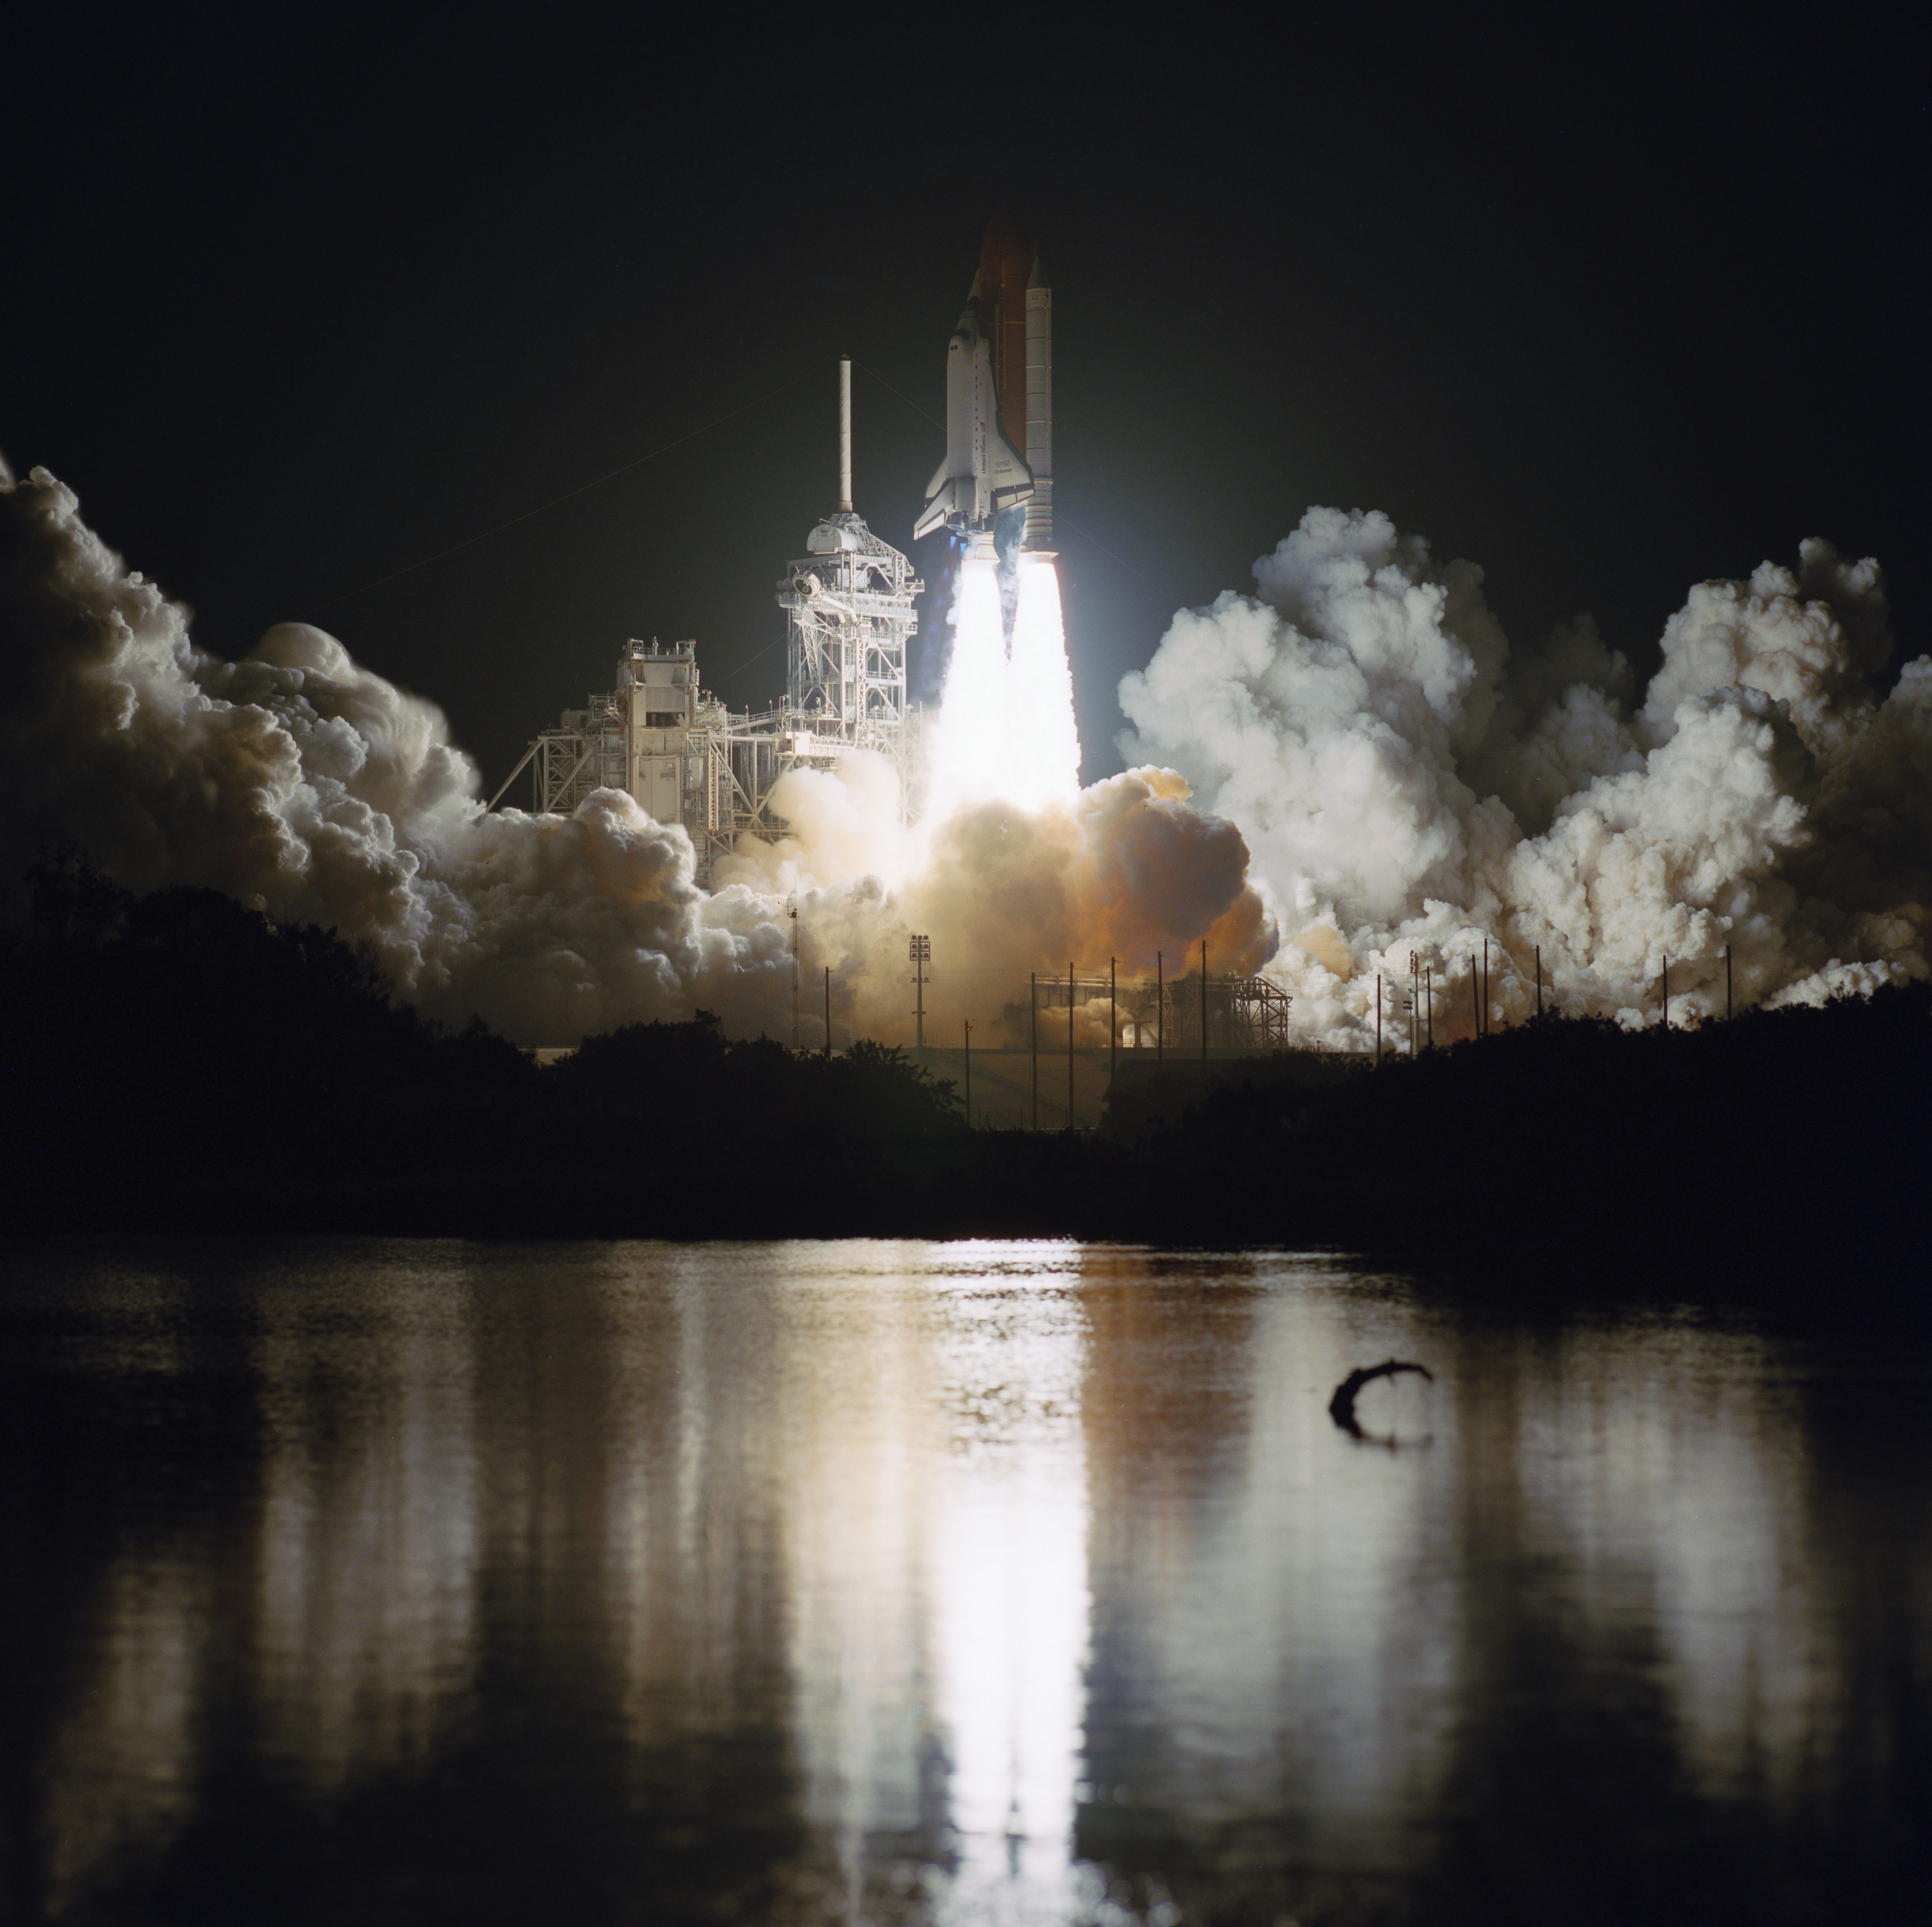 Liftoff of space shuttle Endeavour on the STS-61 mission to repair the Hubble Space Telescope